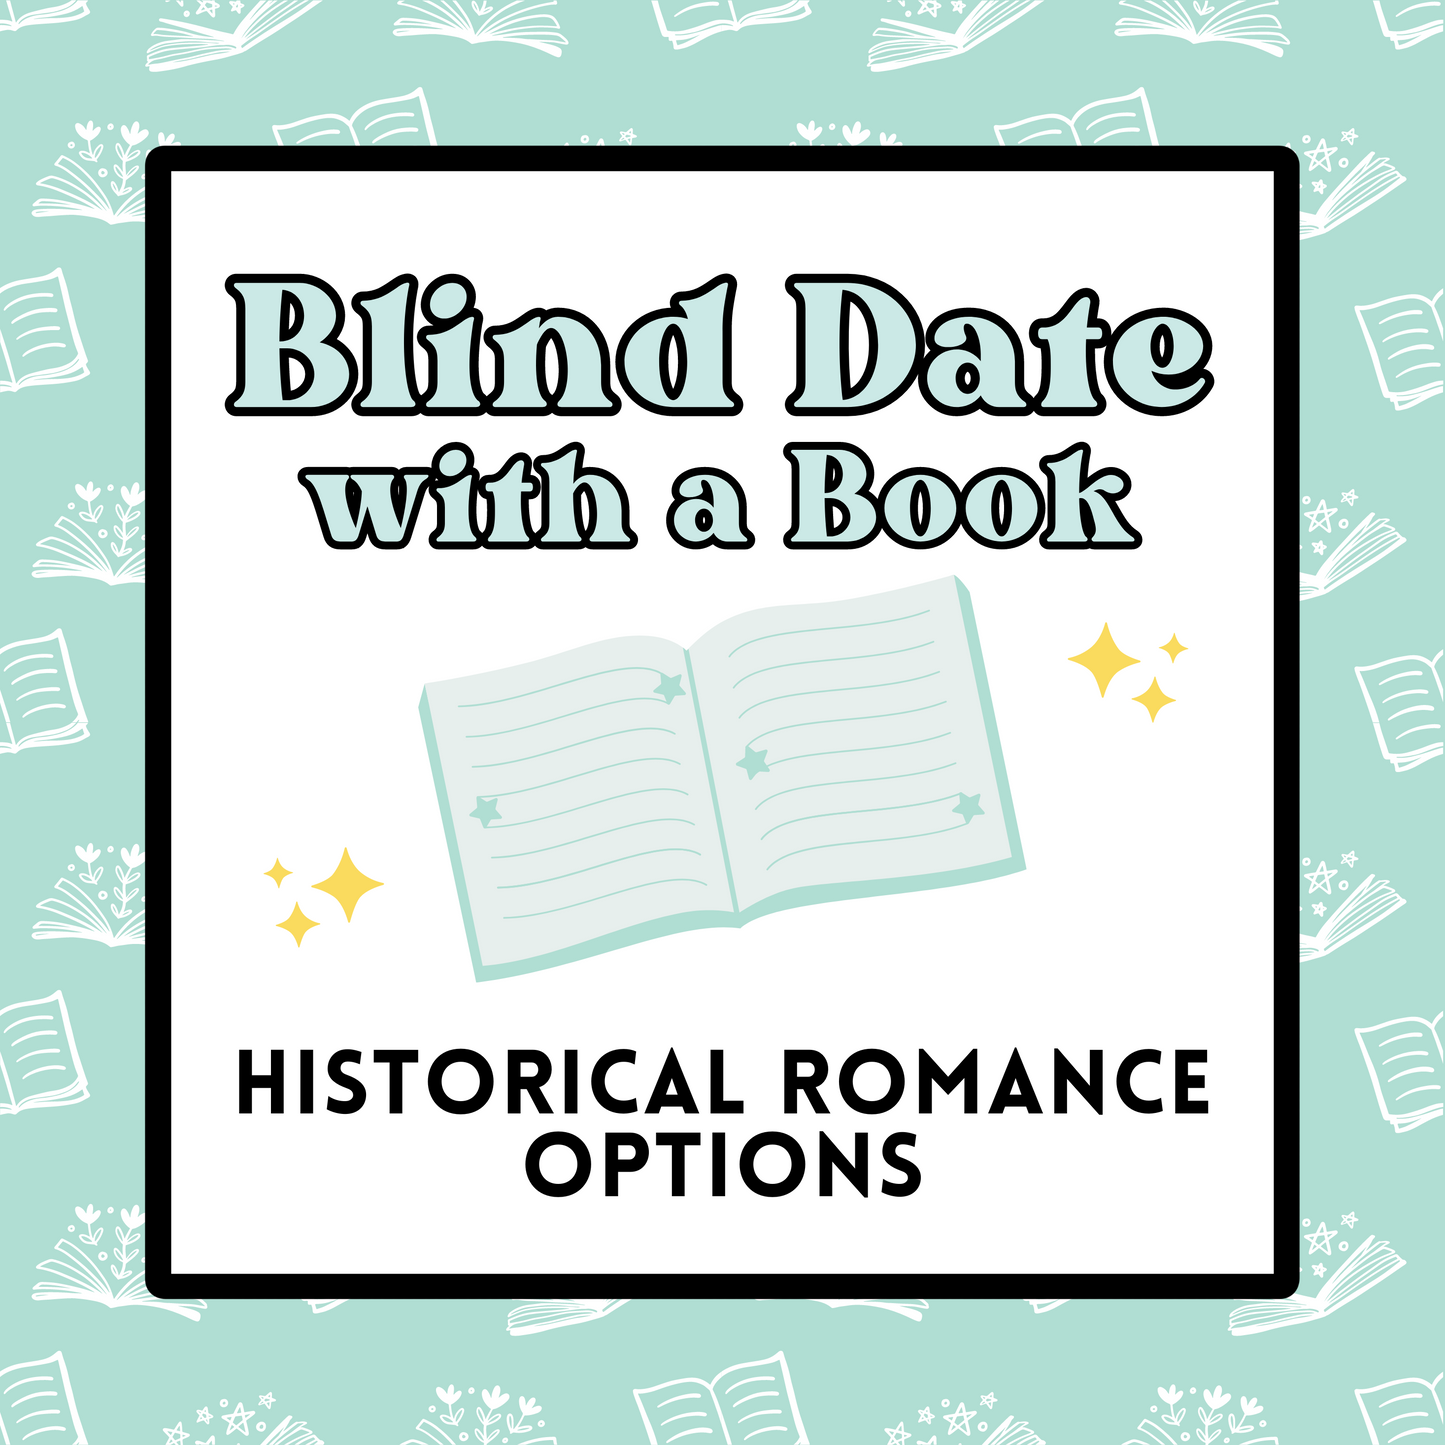 Blind Date with a Book:  Historical Romance